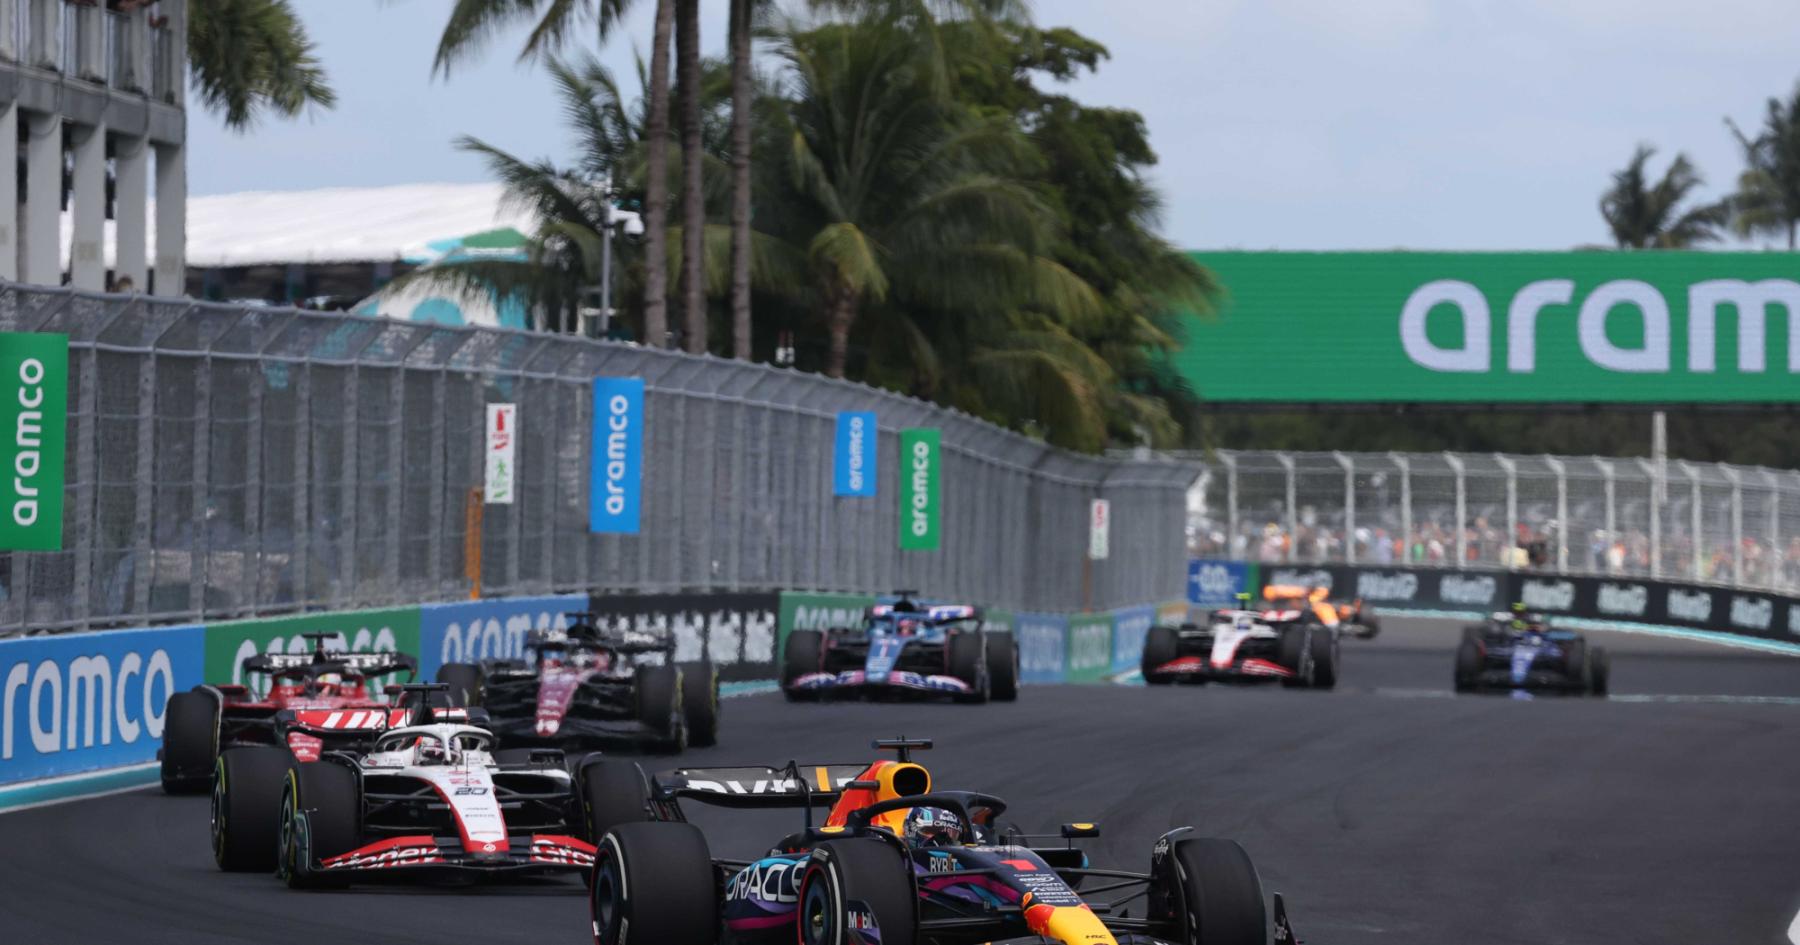 Revving Up the Race: Qualifying for the F1 Miami Grand Prix Set to Begin